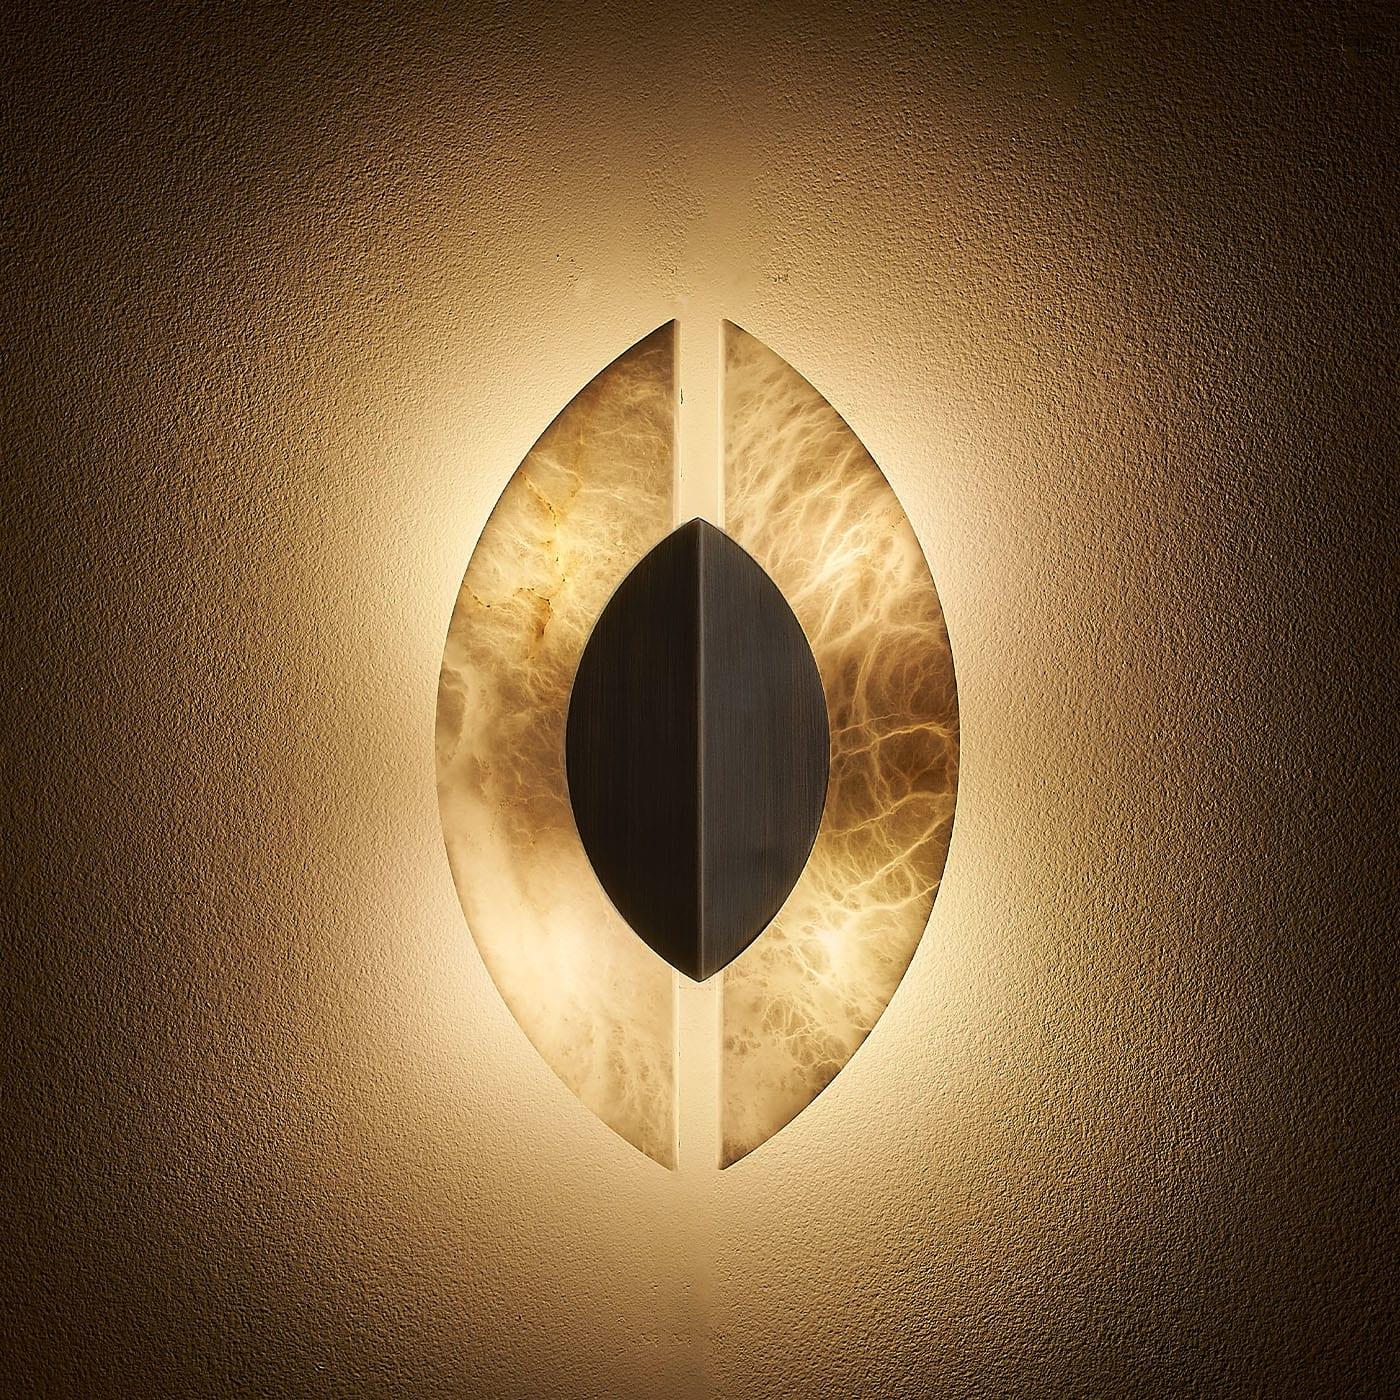 The Shields wall sconce is designed to evoke a sense of medieval history and warrior culture, with its brushed bronze and alabaster materials reminiscent of ancient shields. The use of alabaster also adds a natural, textured element to the design,